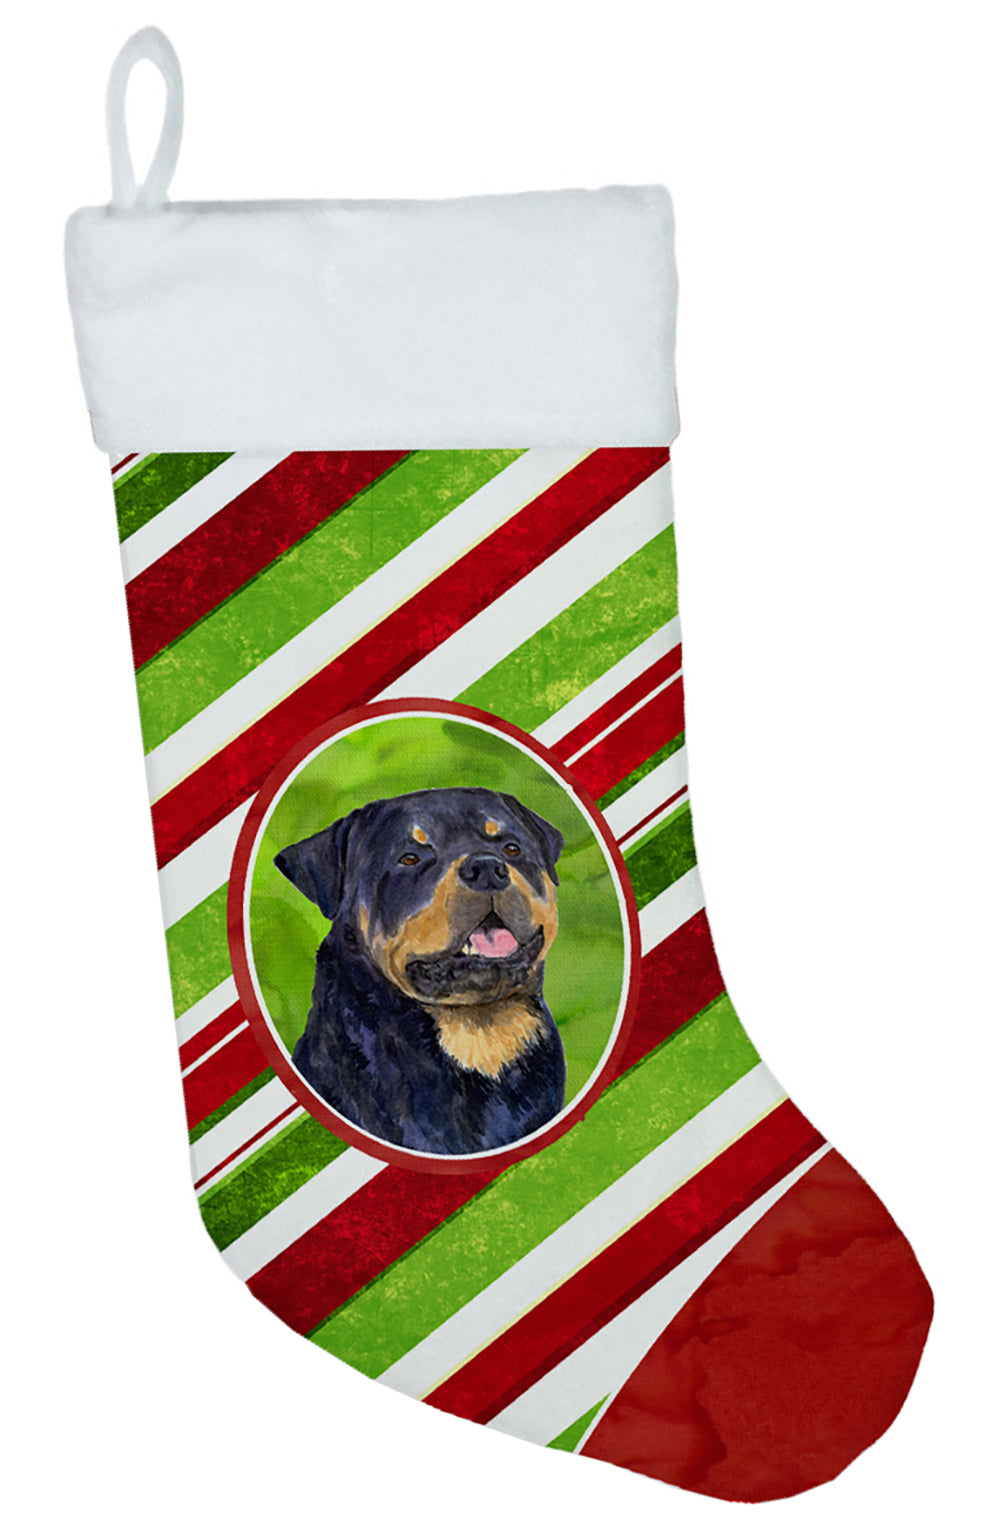 Rottweiler Winter Snowflakes Christmas Stocking SS4593